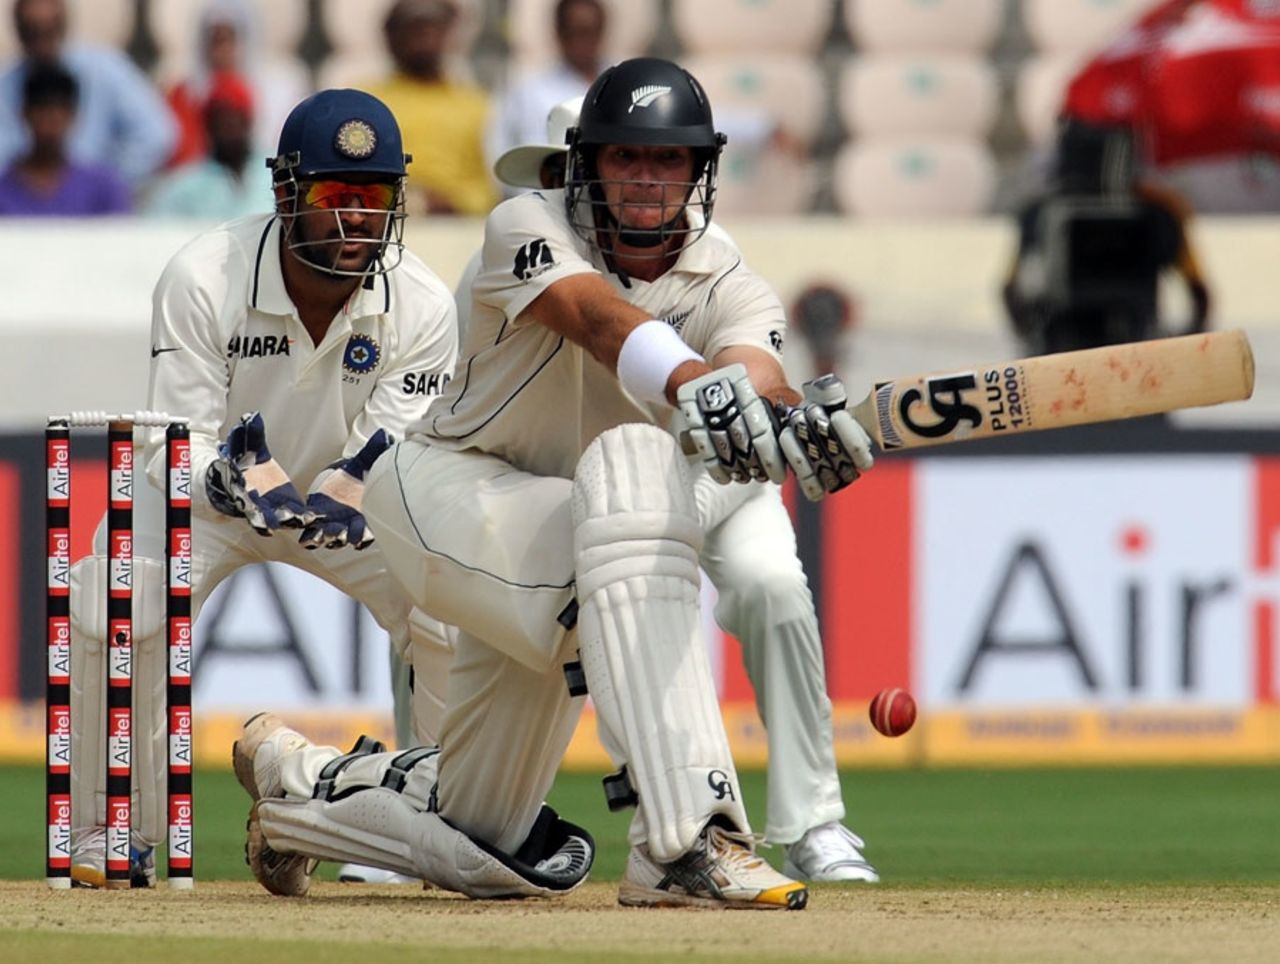 Tim McIntosh sweeps as MS Dhoni watches, India v New Zealand, 2nd Test, Hyderaabad, 1st day, November 12, 2010